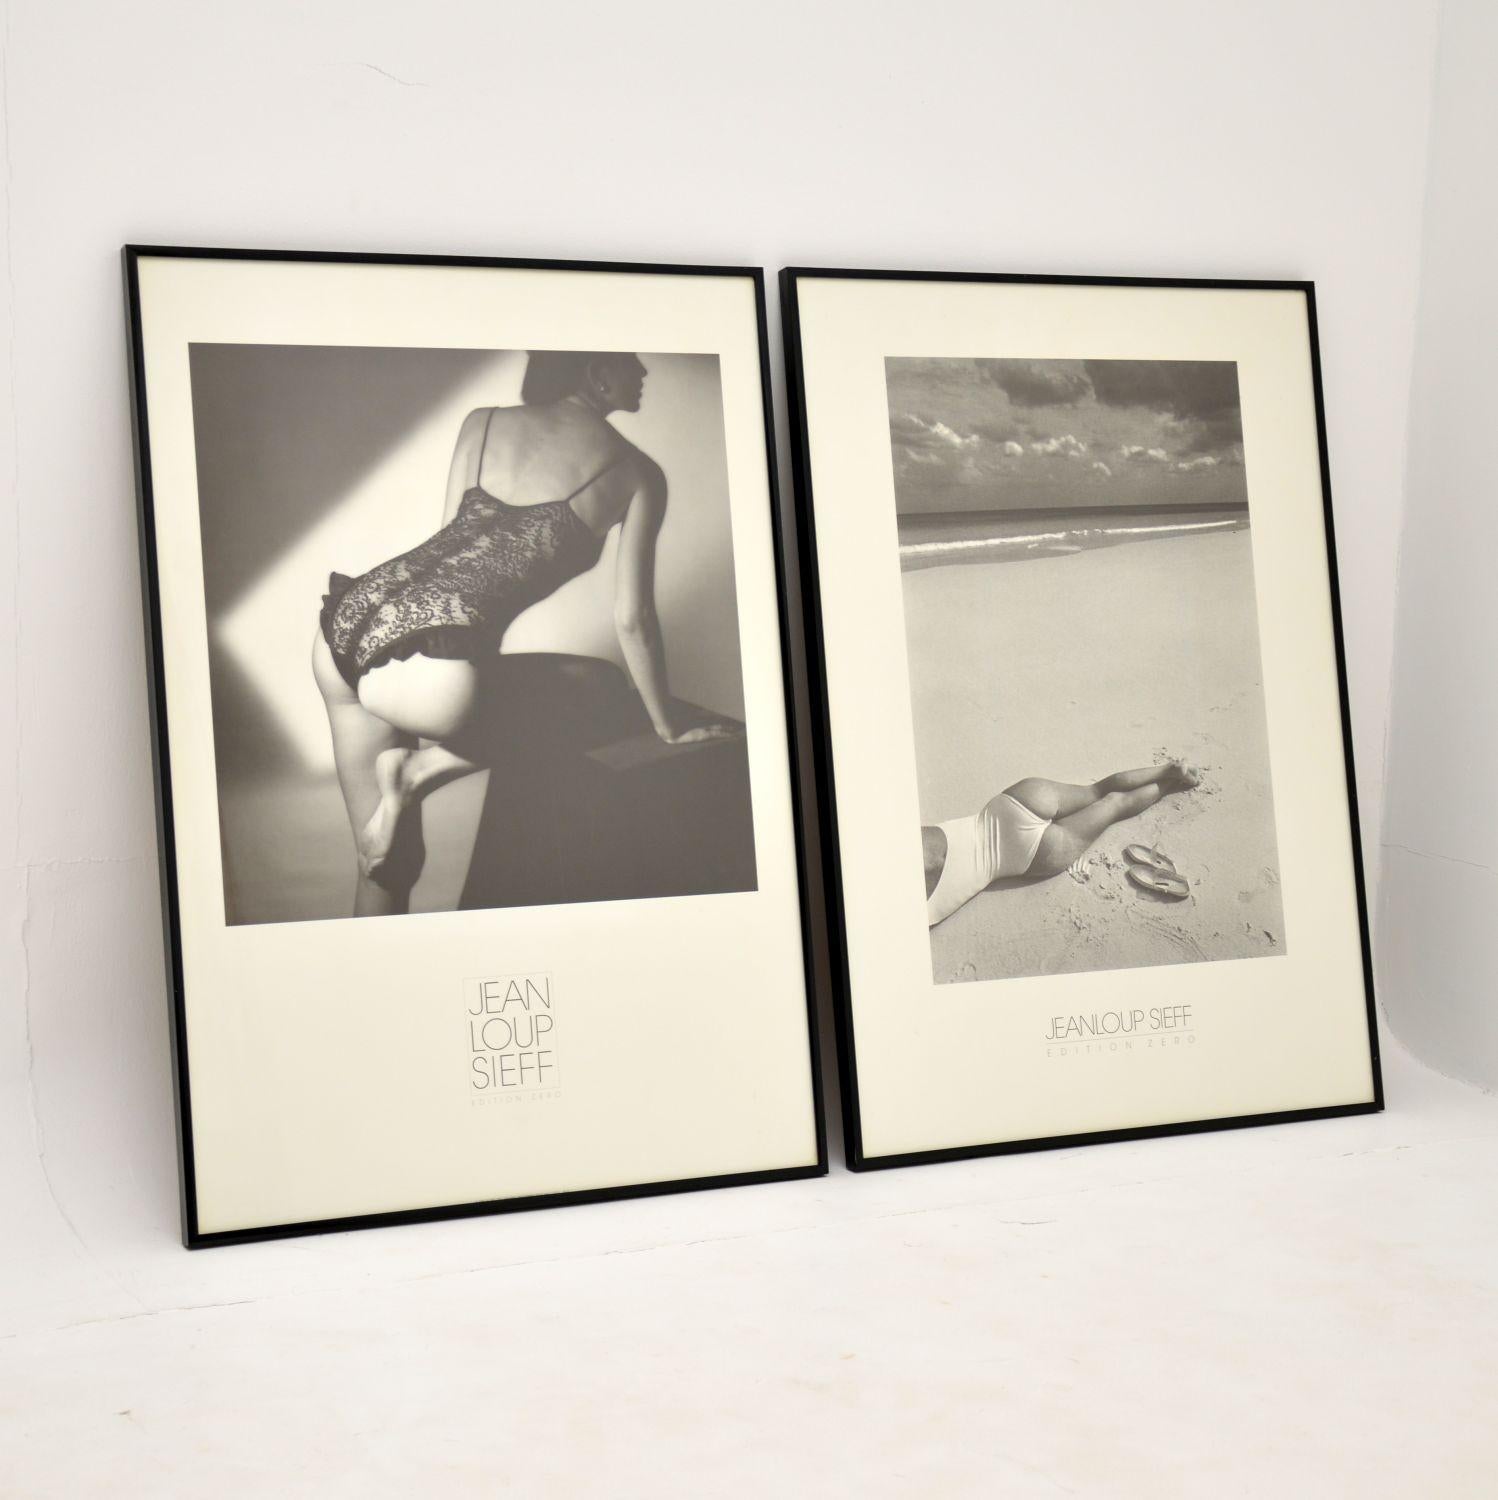 A beautiful pair of framed art prints by the famous French photographer Jeanloup Sieff. They date from the 1980’s, and were published in West Germany.

The condition is excellent, they have been well kept and framed in black. There is no damage to